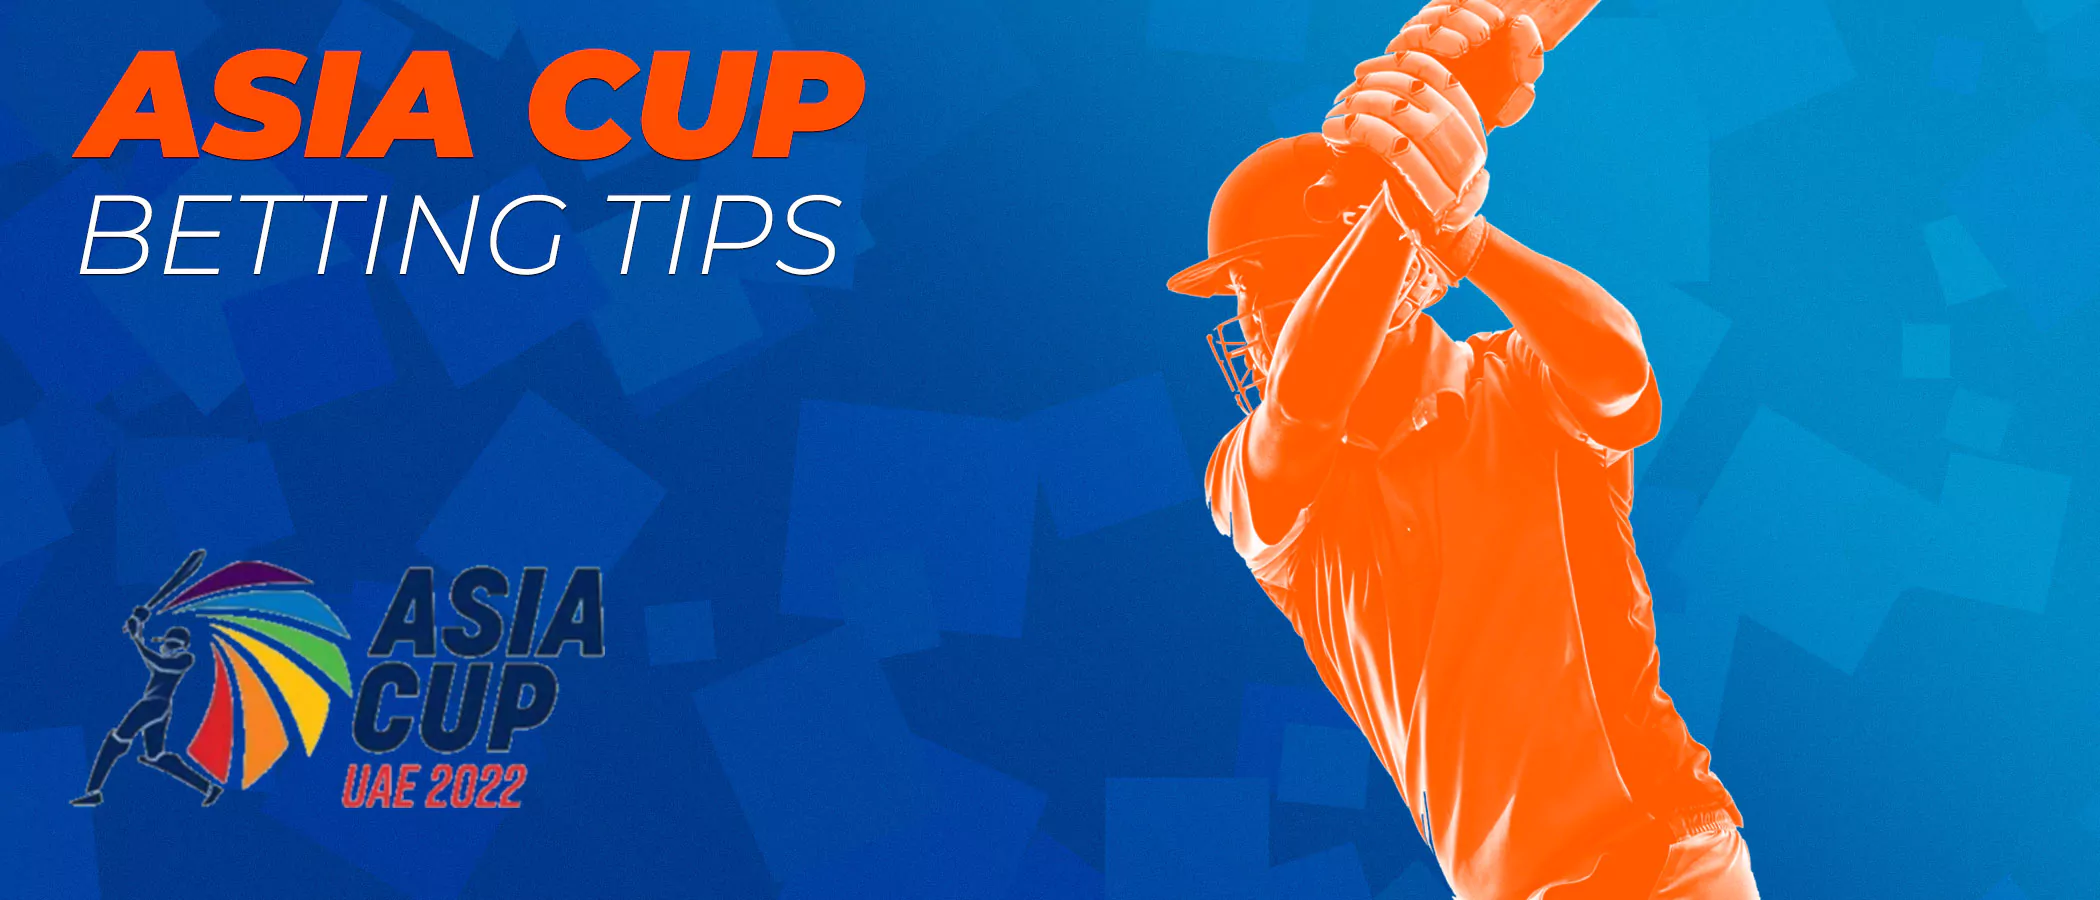 Aisa cup betting tips.